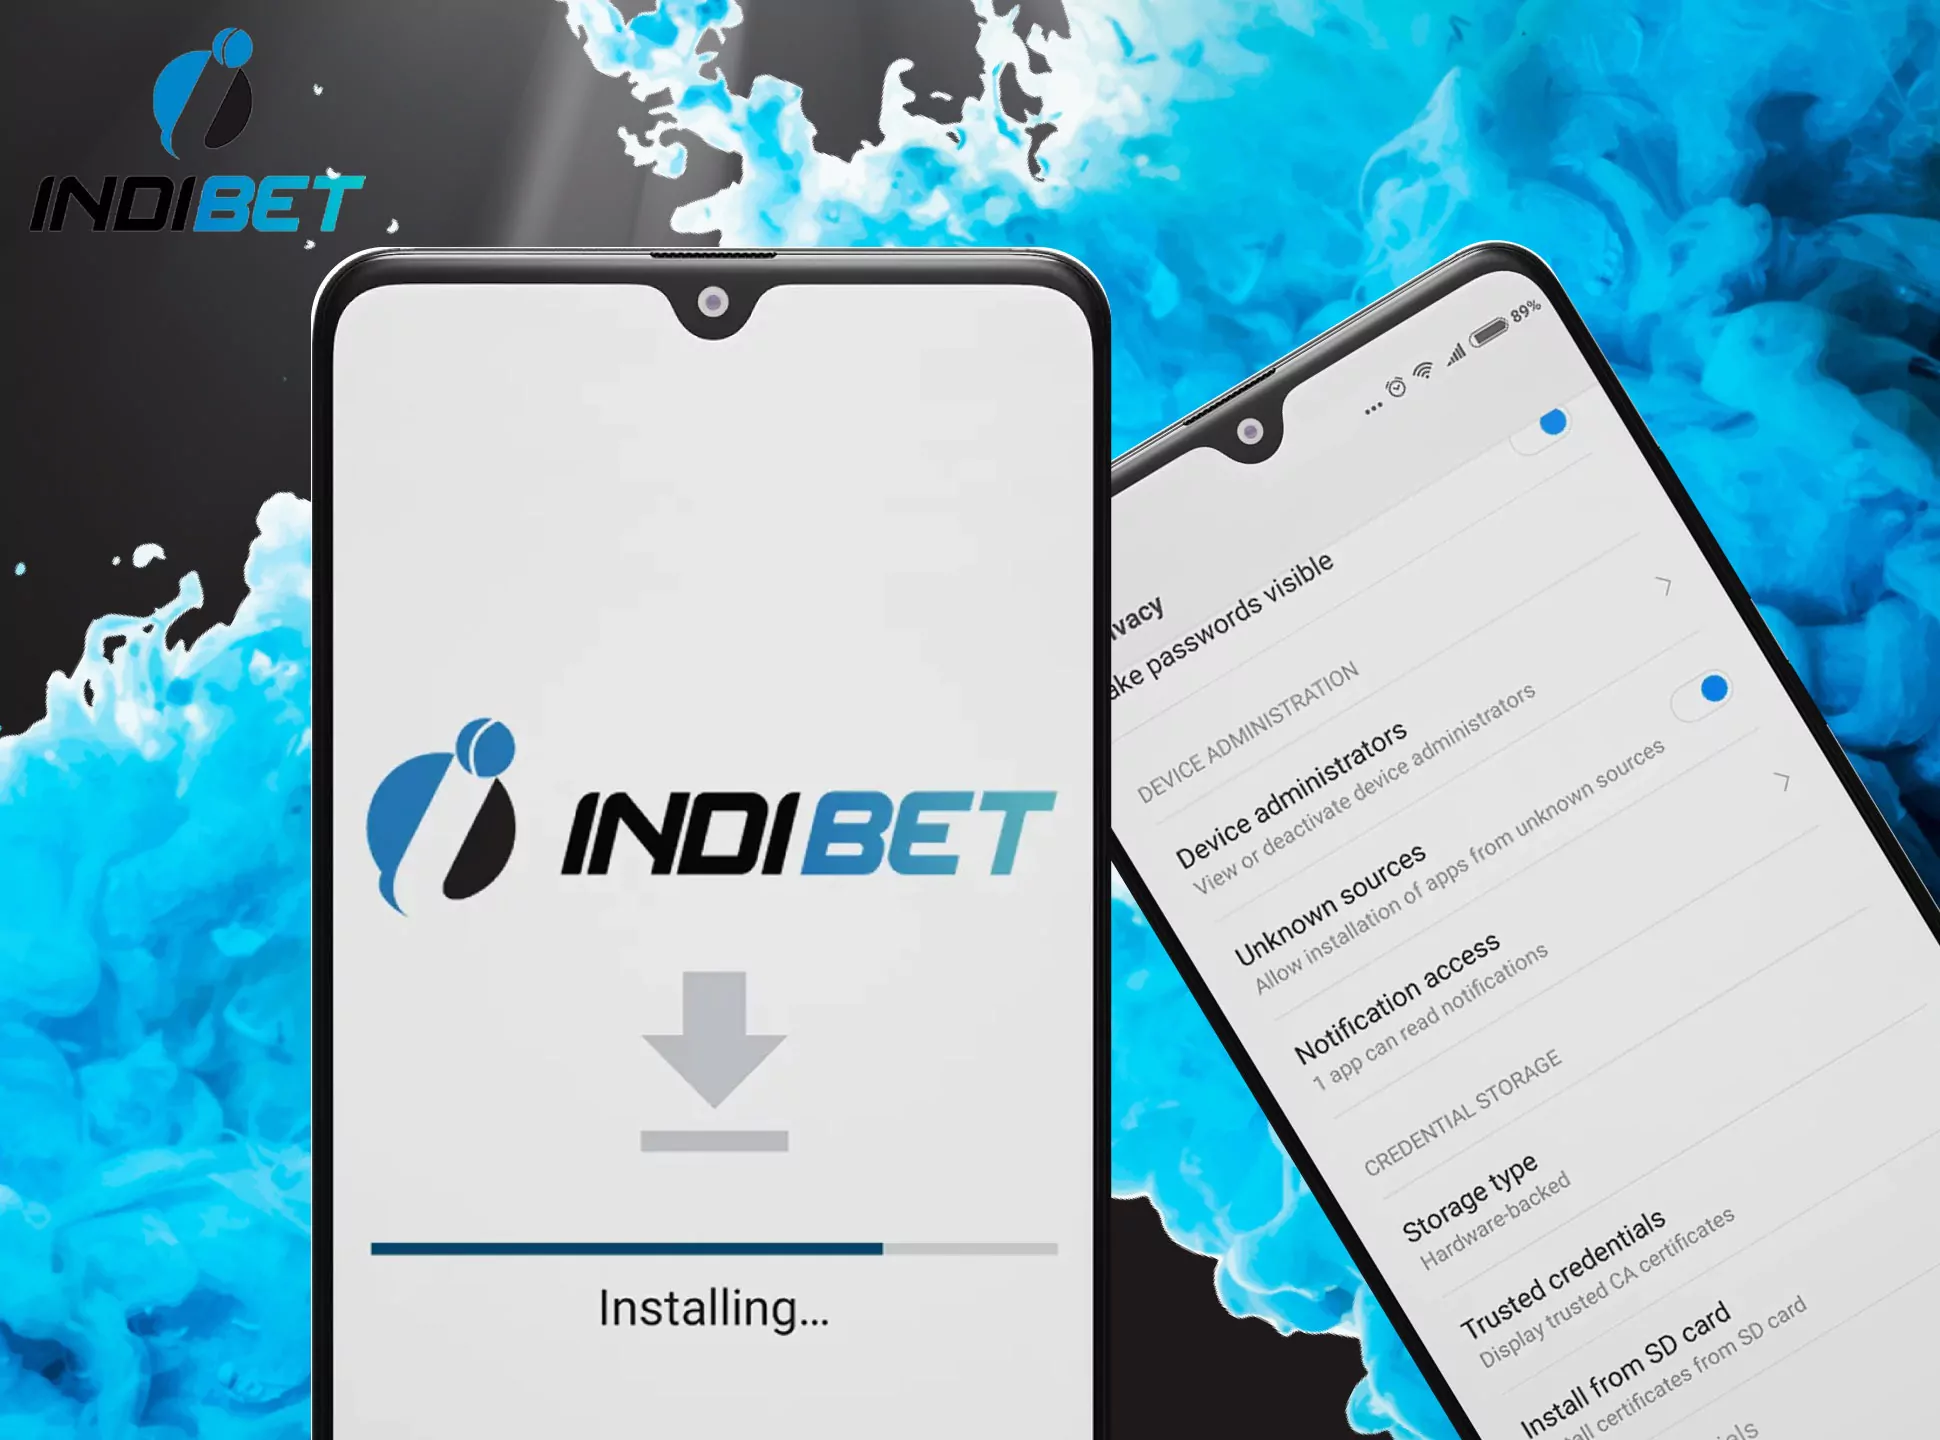 A few simple steps for a quick installation indibet app on your smartphone is very easy.